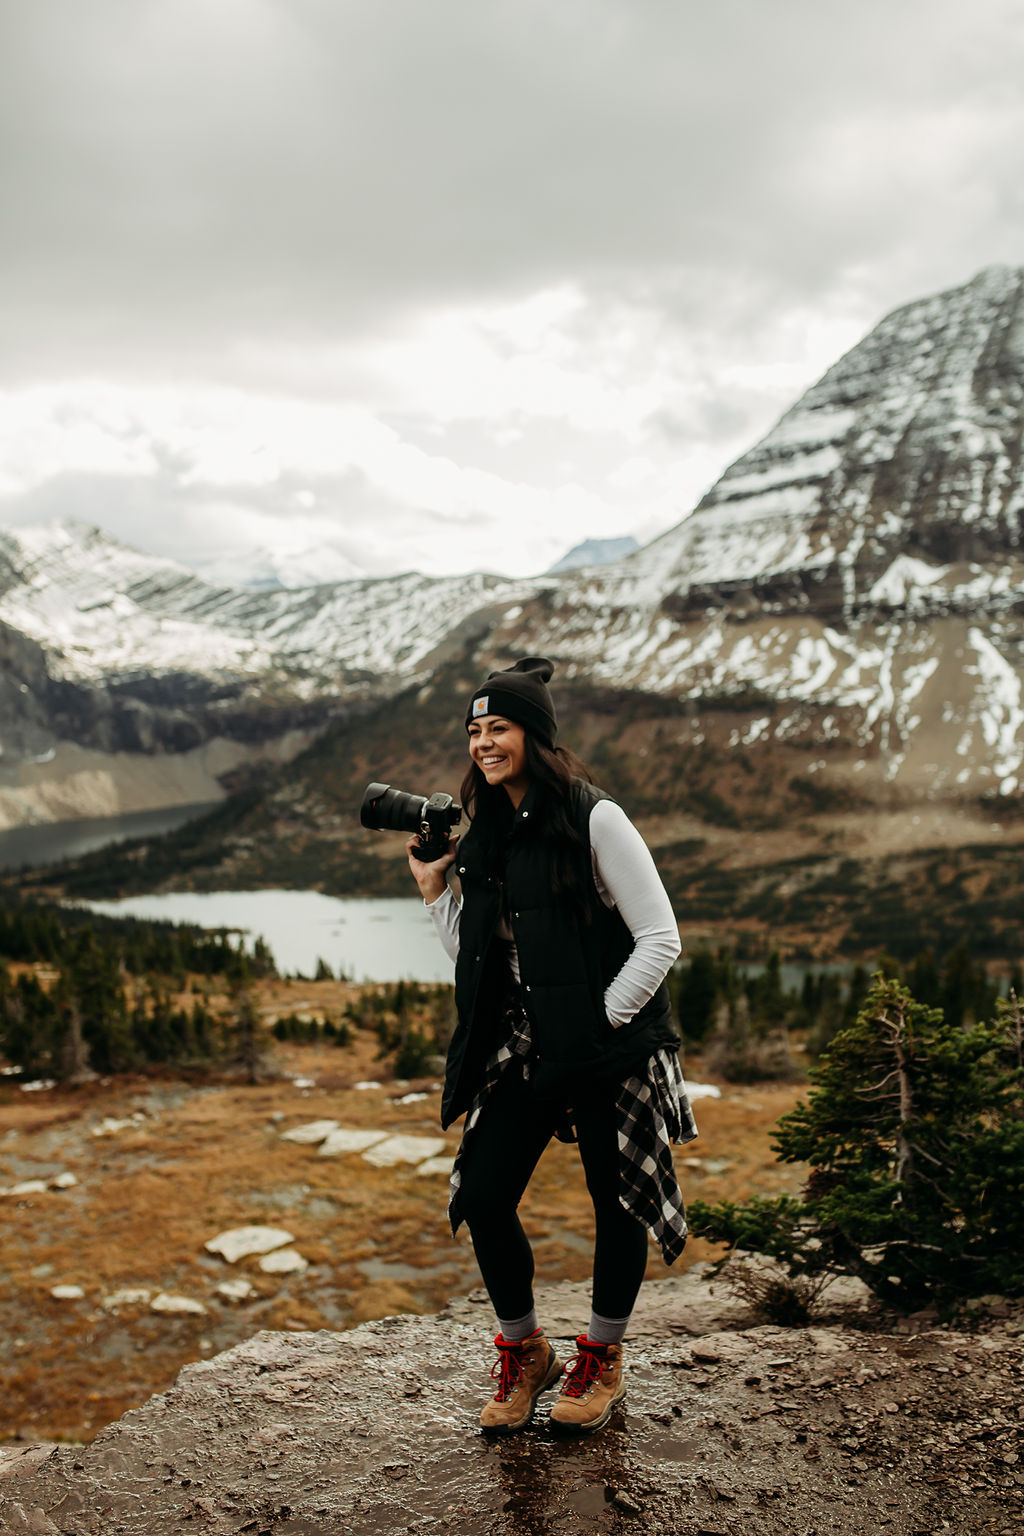 Brogan from photography by brogan in hiking attire smiles while taking photos with a camera in a mountainous landscape with a snowy peak and lake in the background.